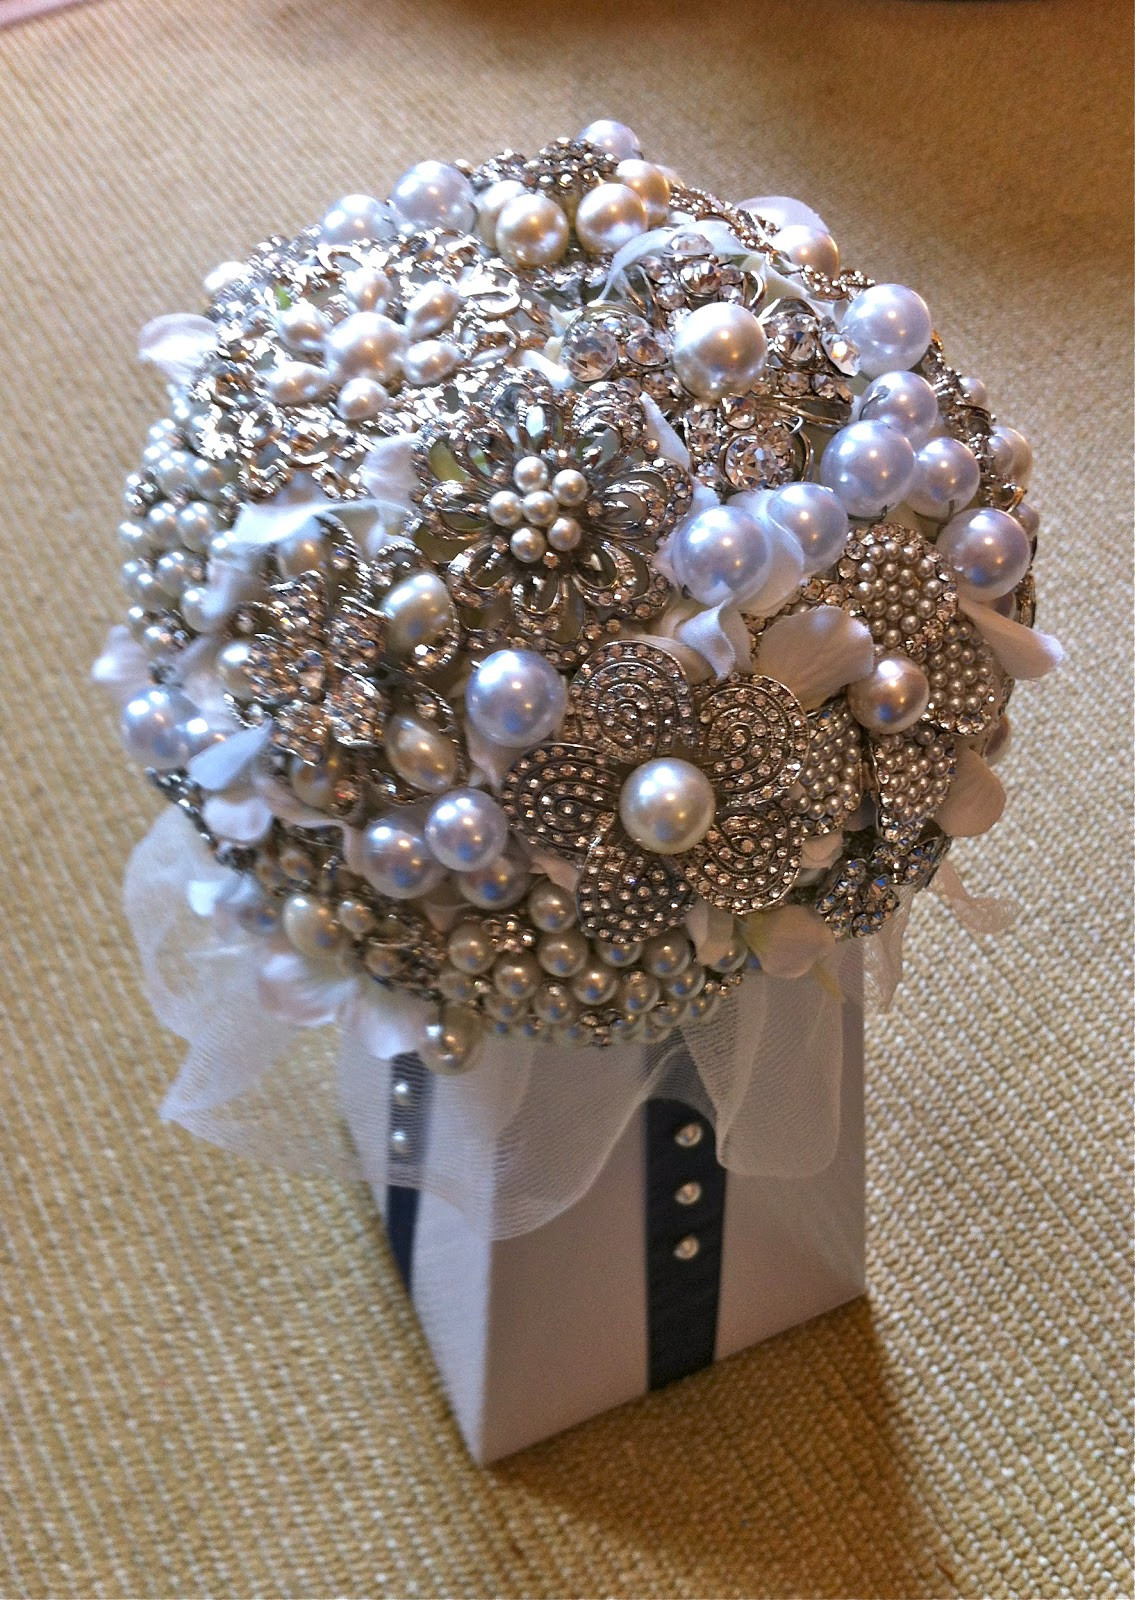 Brooches Bouquet
 Have You Seen My New DIY Brooch Bouquet Page